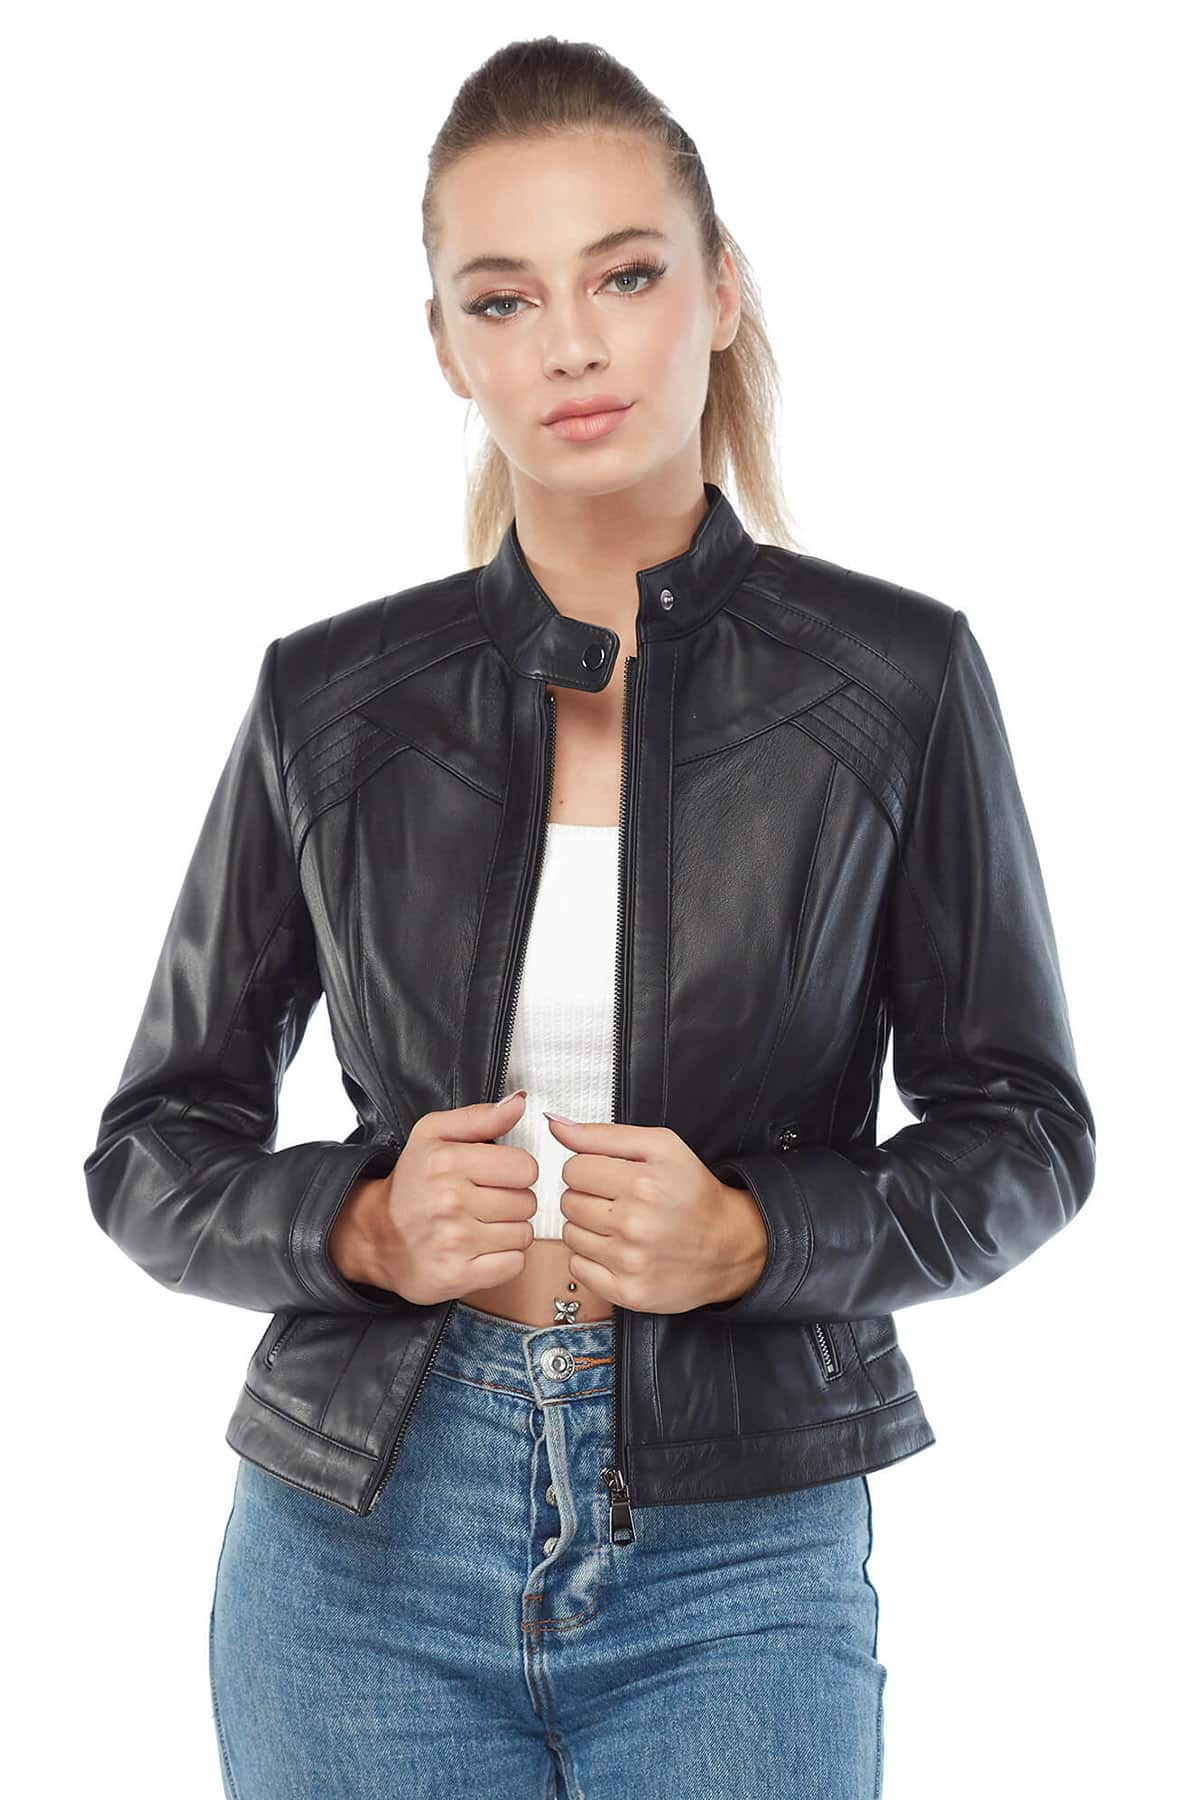 Rosa Women’s Leather Jacket in Black Pose